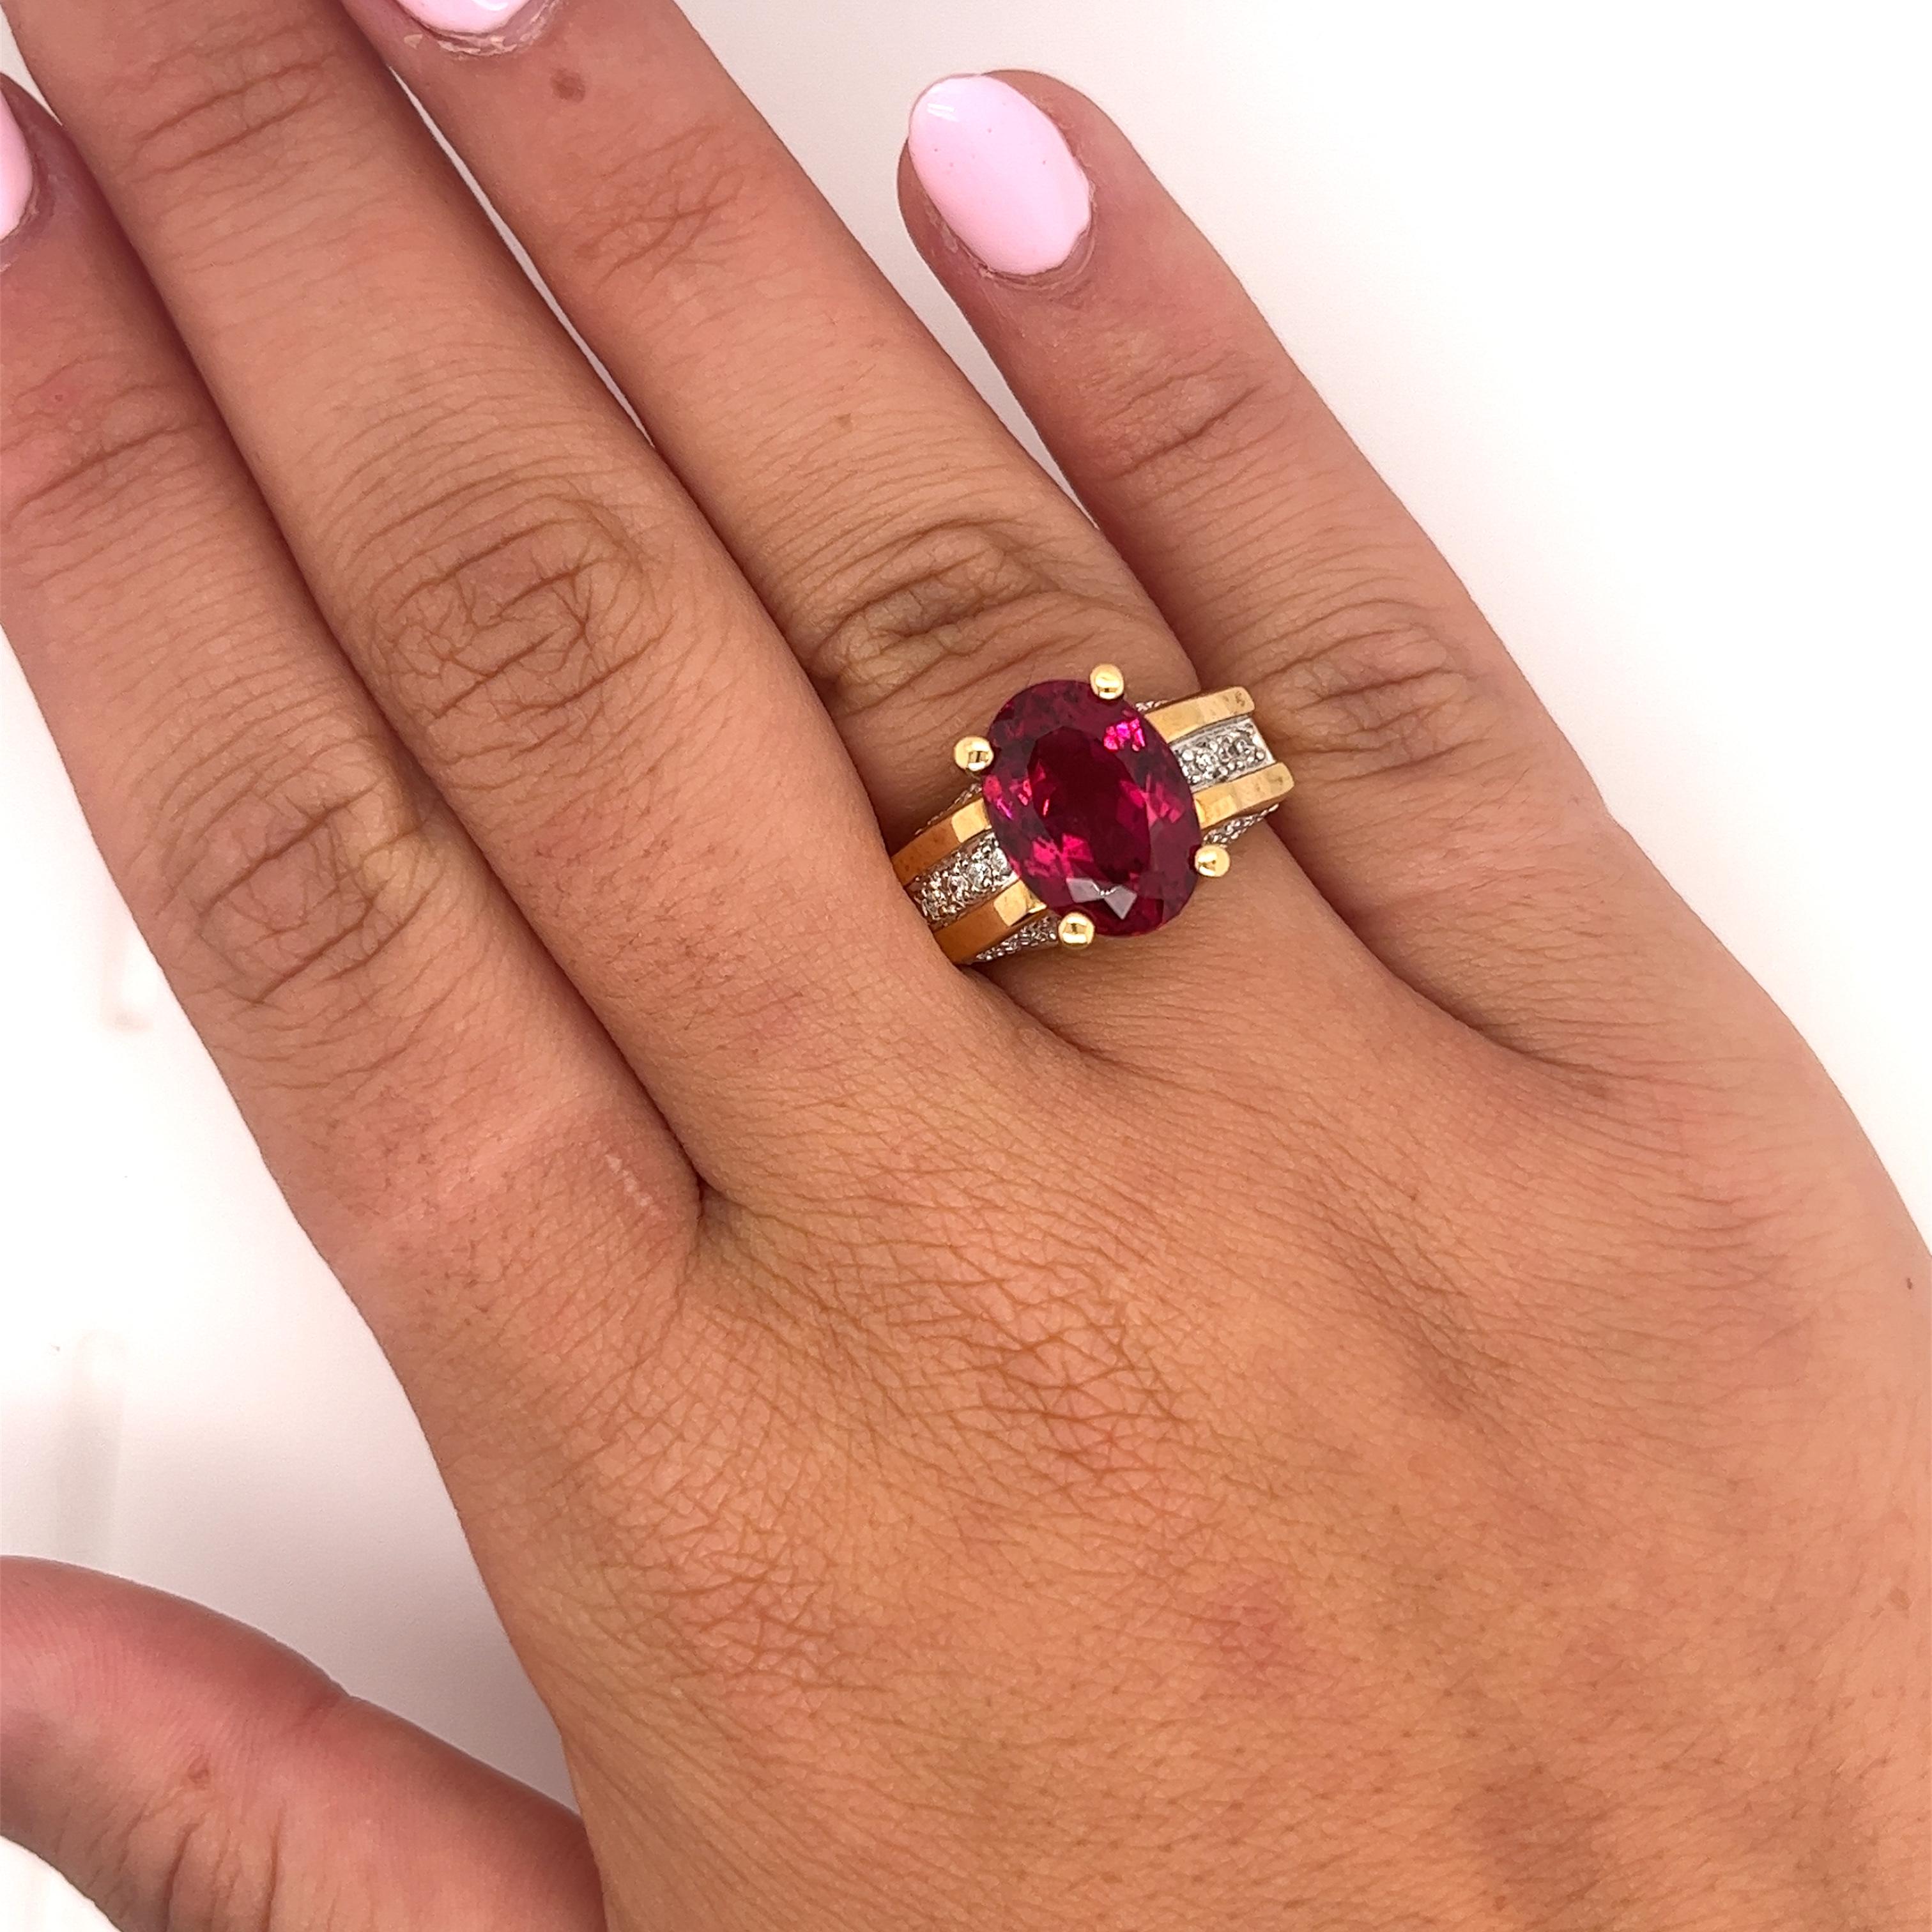 GIA Certified Oval Brilliant 7 Carat Purplish Red Tourmaline Ring, set in 18K Two Tone Gold. Adorned with 26 Round Cut Diamond Side Stones, Totaling 1.35 carats.

The center stone has a rich deep color saturation and minimal/none inclusions to the